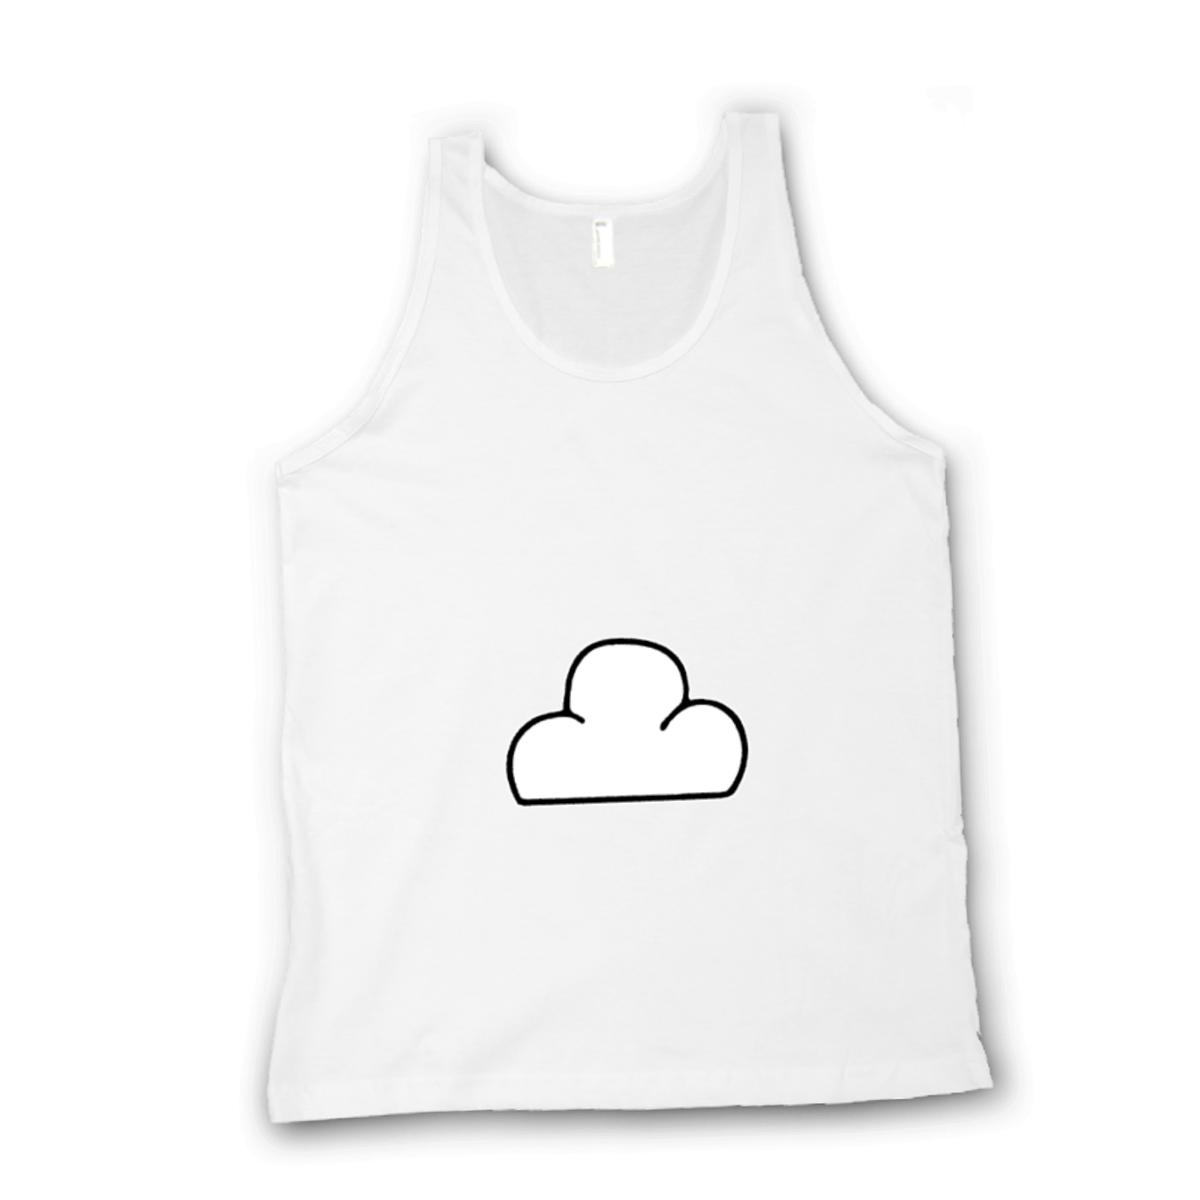 Cloud Unisex Tank Top Extra Small white